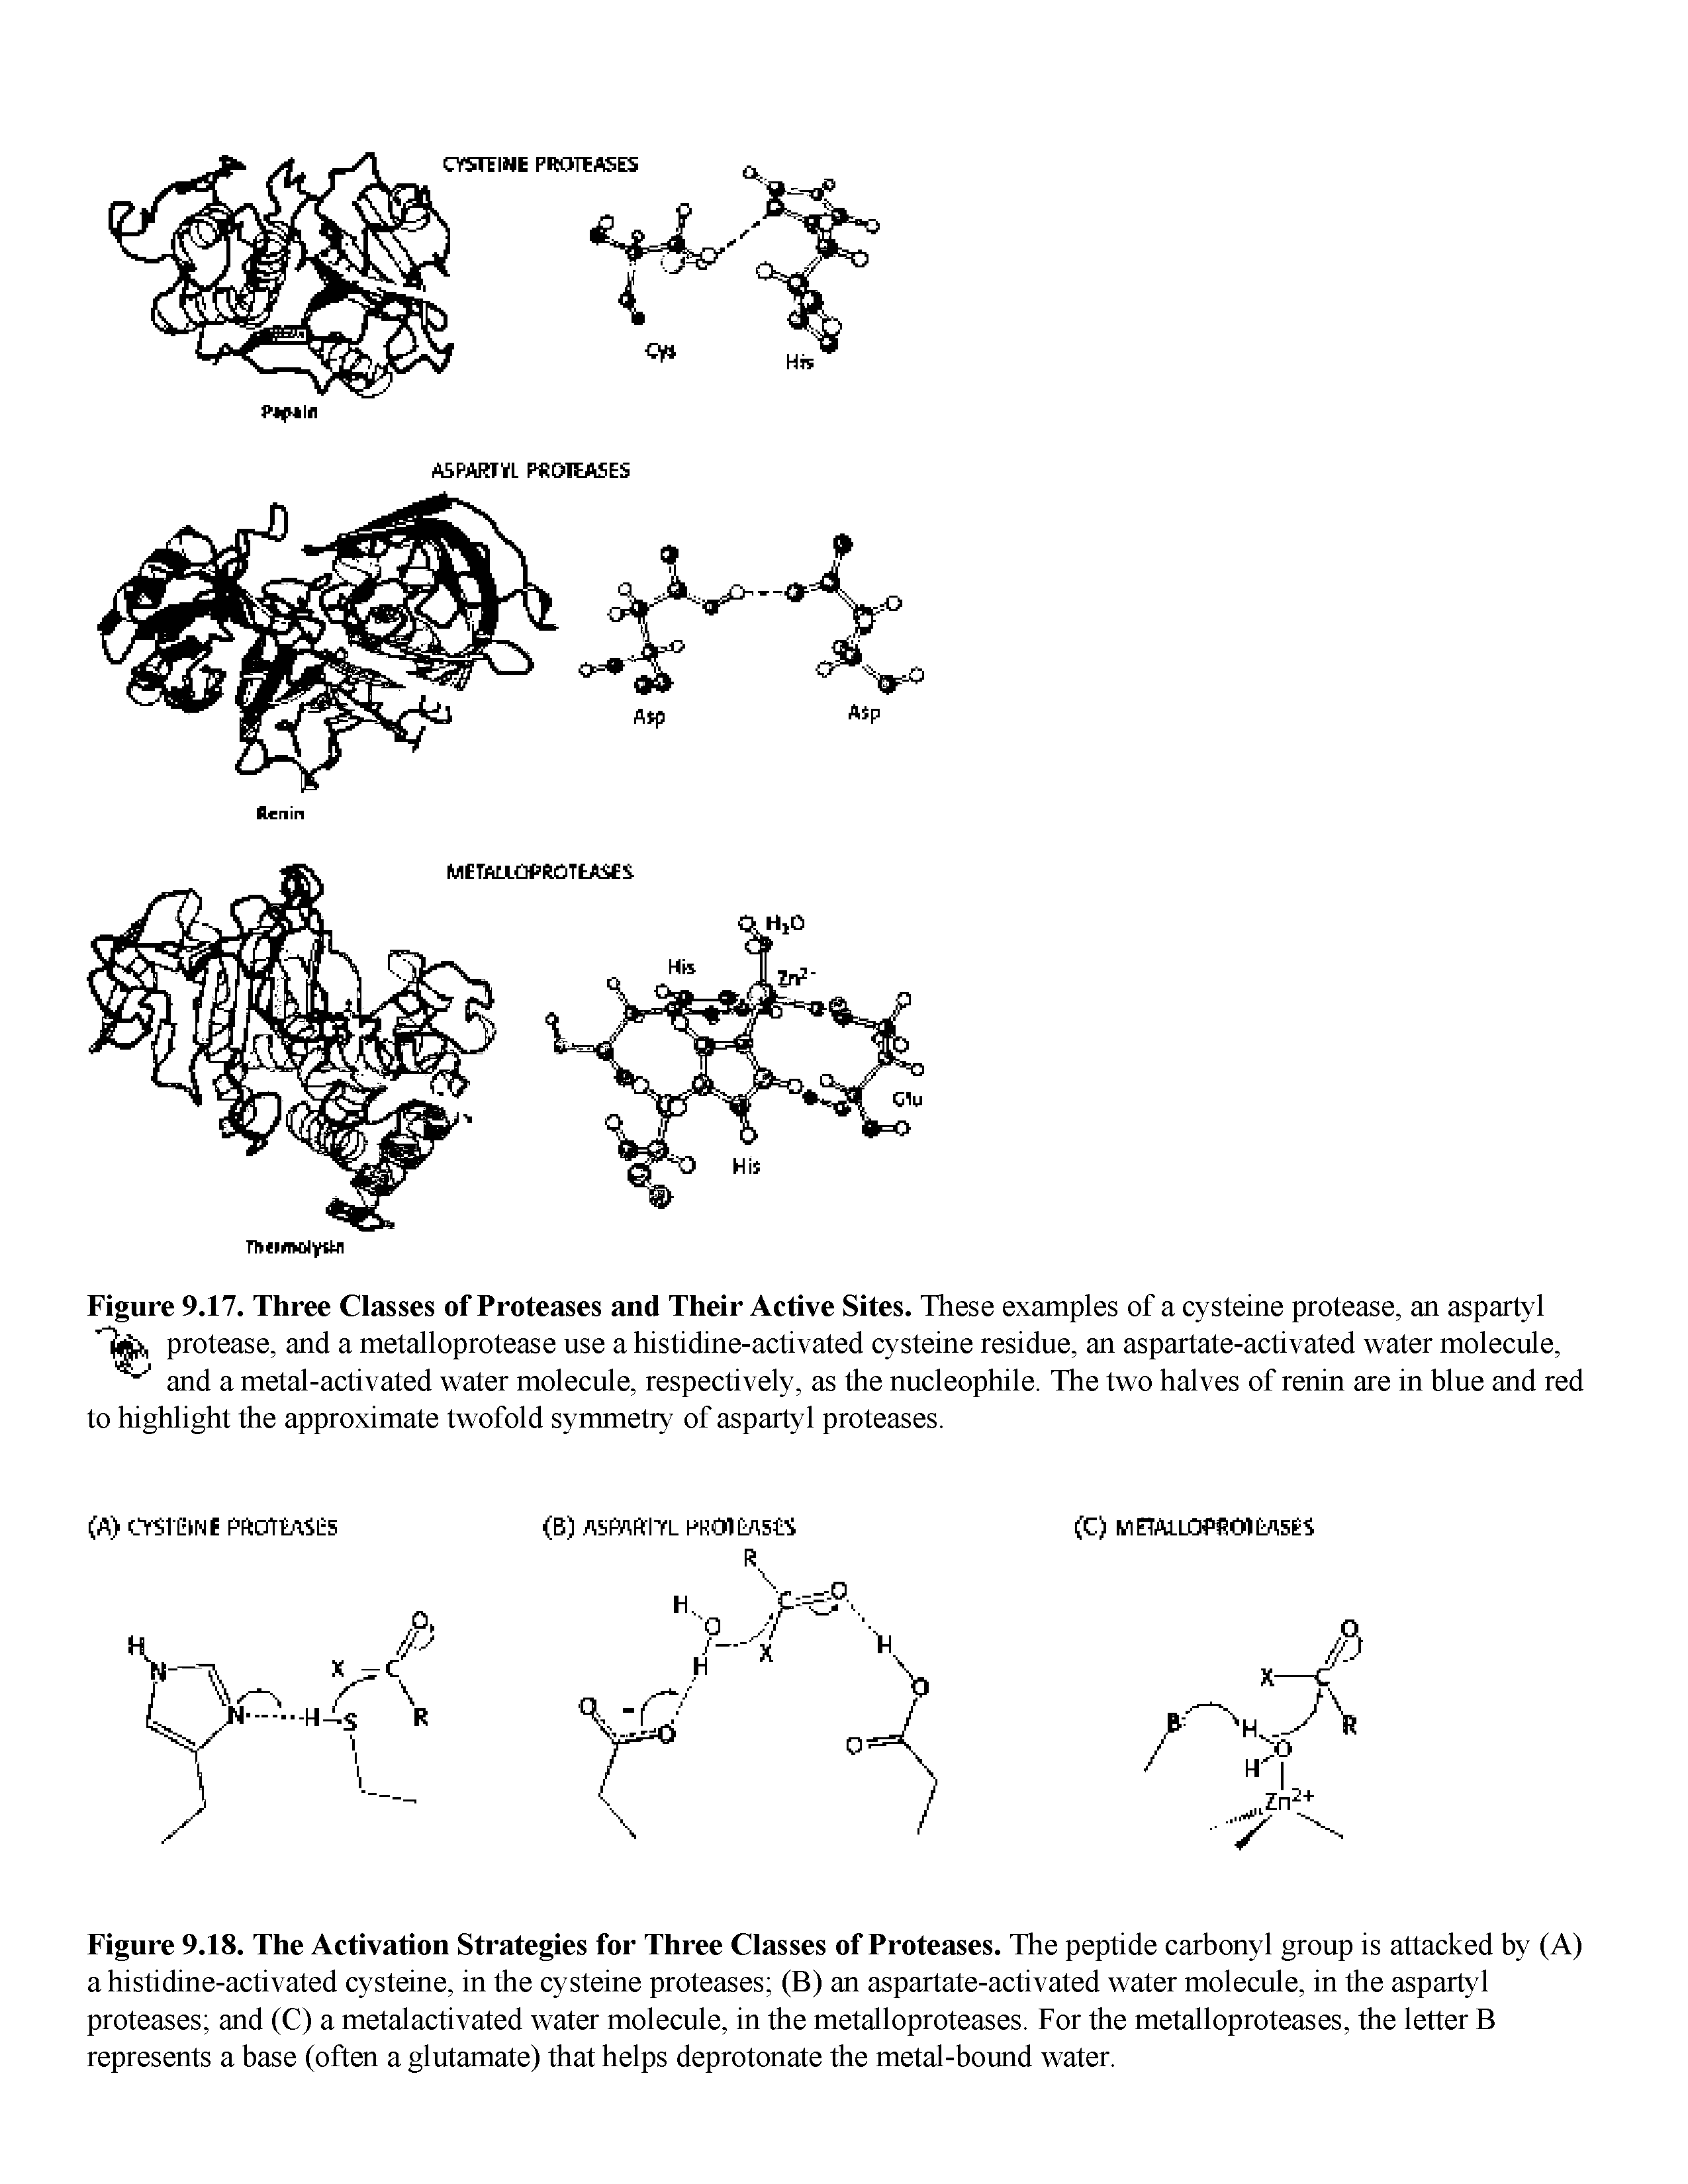 Figure 9.17. Three Classes of Proteases and Their Active Sites. These examples of a cysteine protease, an aspartyl protease, and a metalloprotease use a histidine-activated cysteine residue, an aspartate-activated water molecule, and a metal-activated water molecule, respectively, as the nucleophile. The two halves of renin are in blue and red to highlight the approximate twofold symmetry of aspartyl proteases.